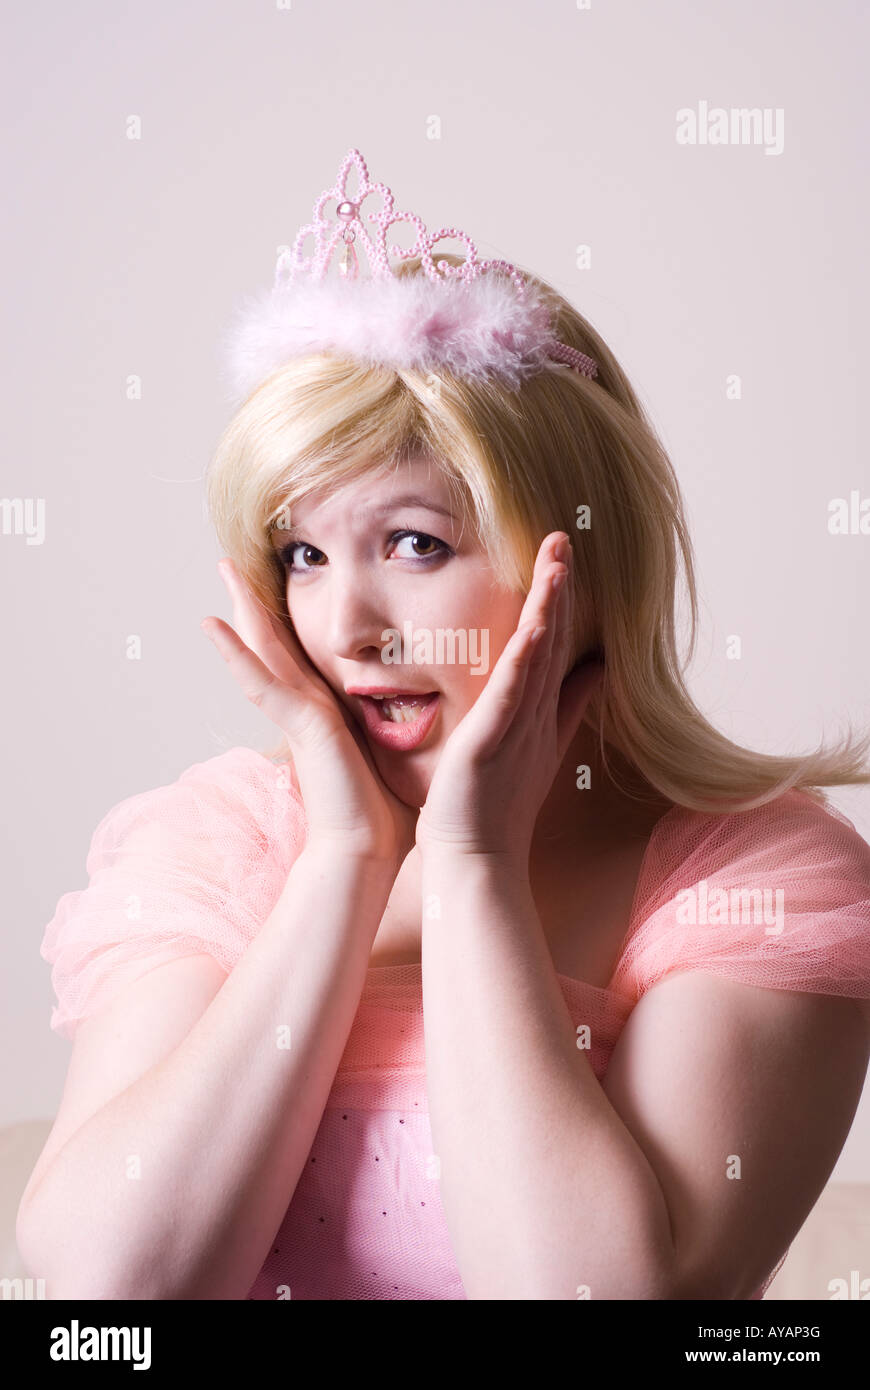 Surprised beautiful woman wearing pink tiara hands on face mouth open looking at camera Stock Photo